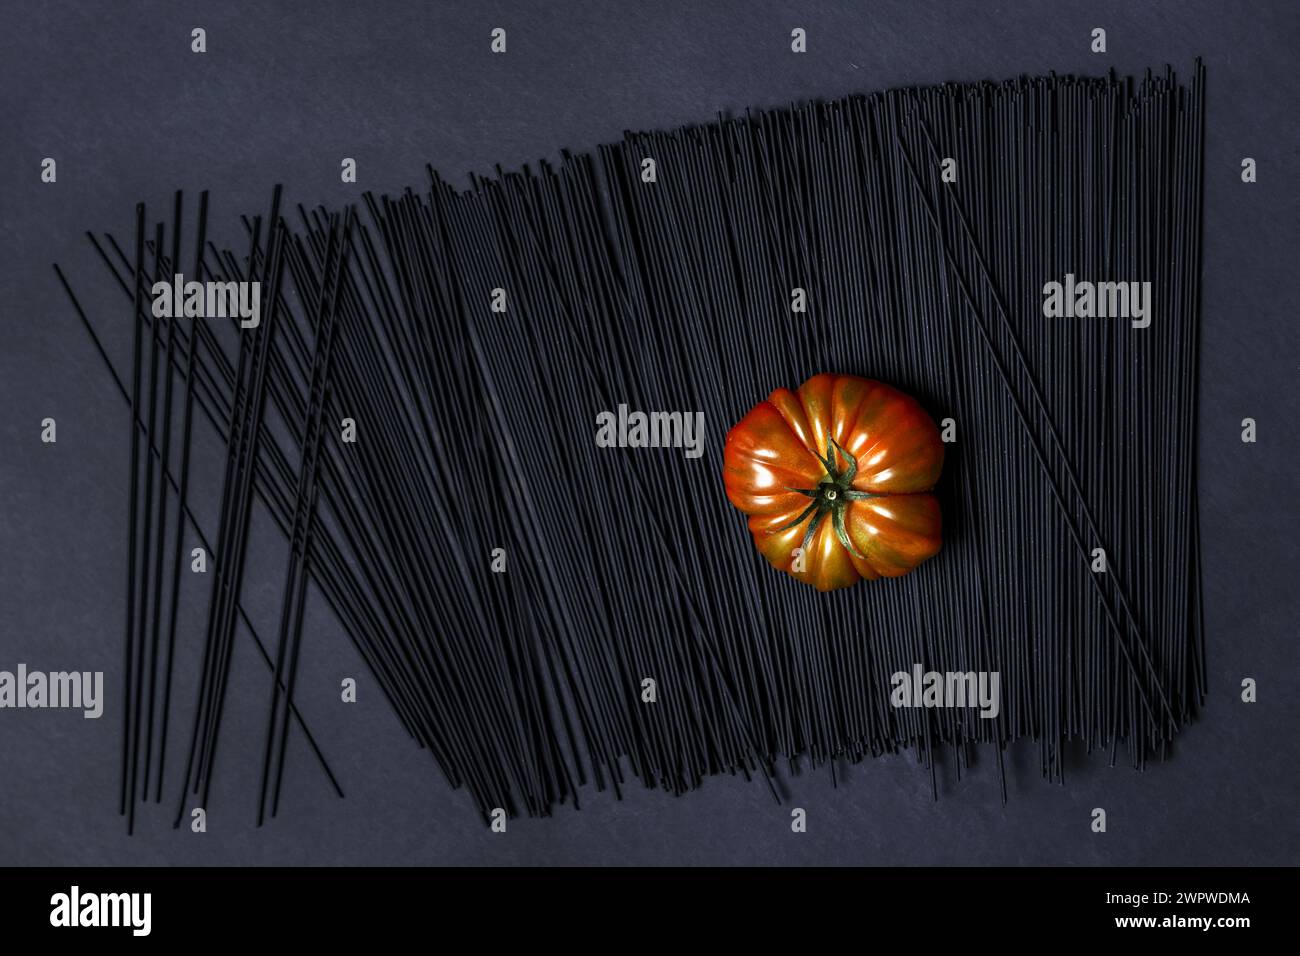 A succulent ripe Raf tomato on a black dyed spaghetti all on a smooth black surface Stock Photo